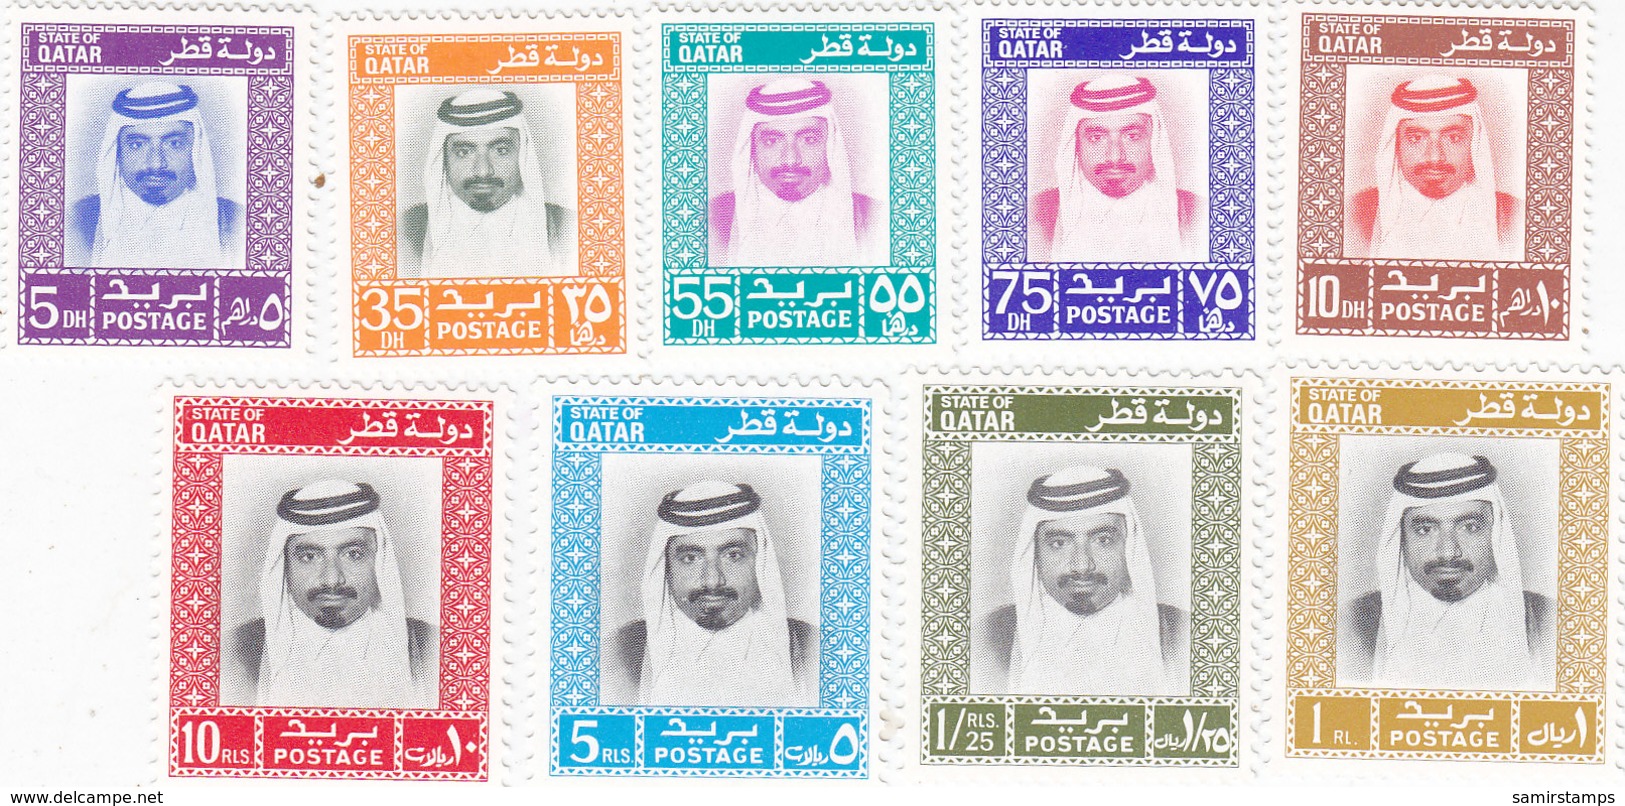 Qatar 1972 Definitive Set Complete MNH 9 Stamps- Rare Set- Reduced Price- SKRILL PAYMENT ONLY - Qatar